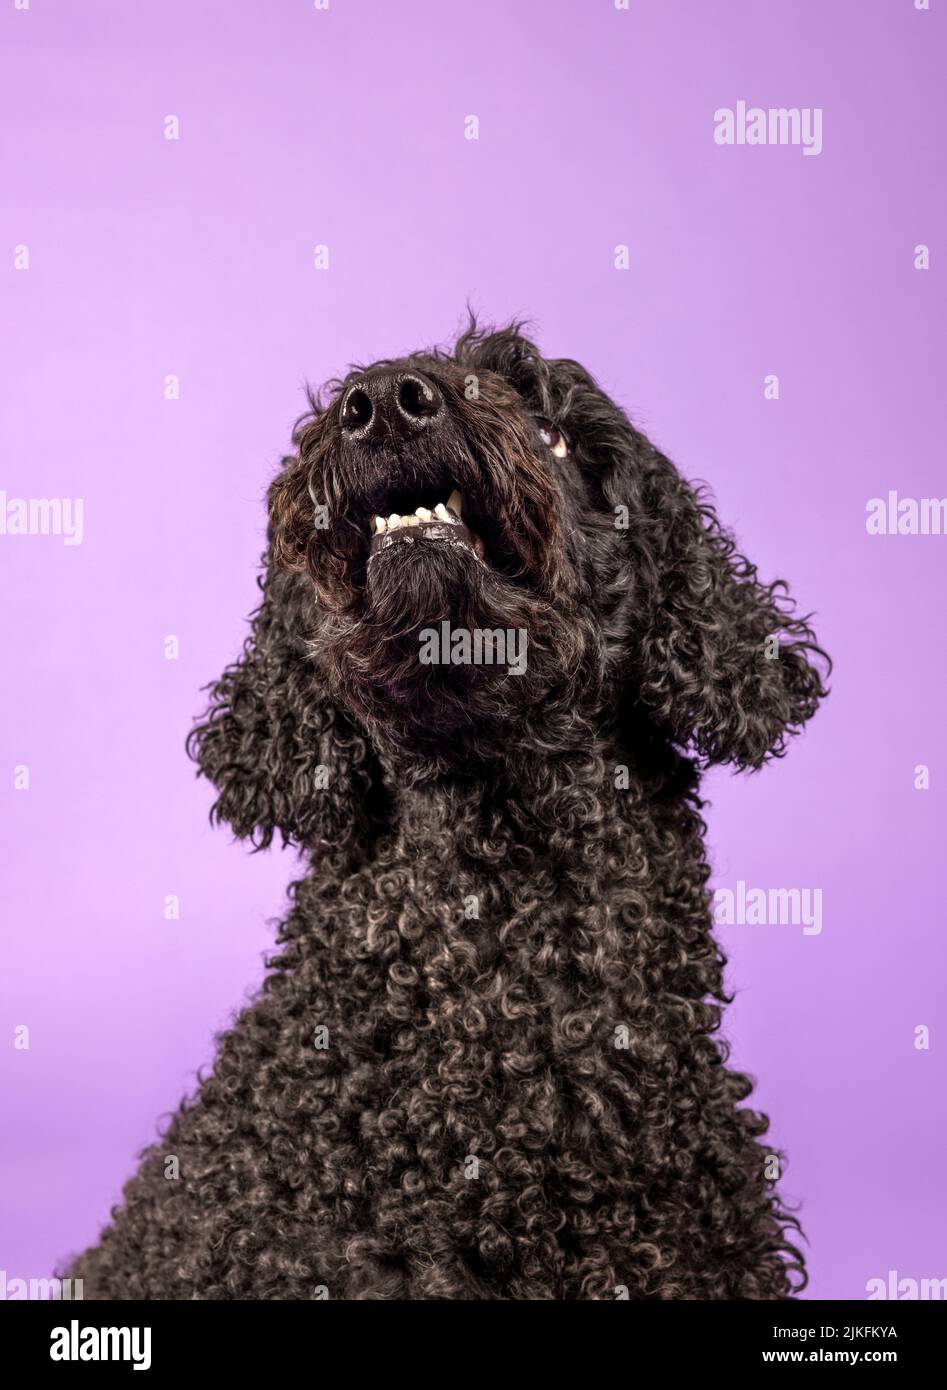 A beautiful black Labradoodle dog, photographed in a studio and looking towards the camera. Photographed against a plain purple background Stock Photo